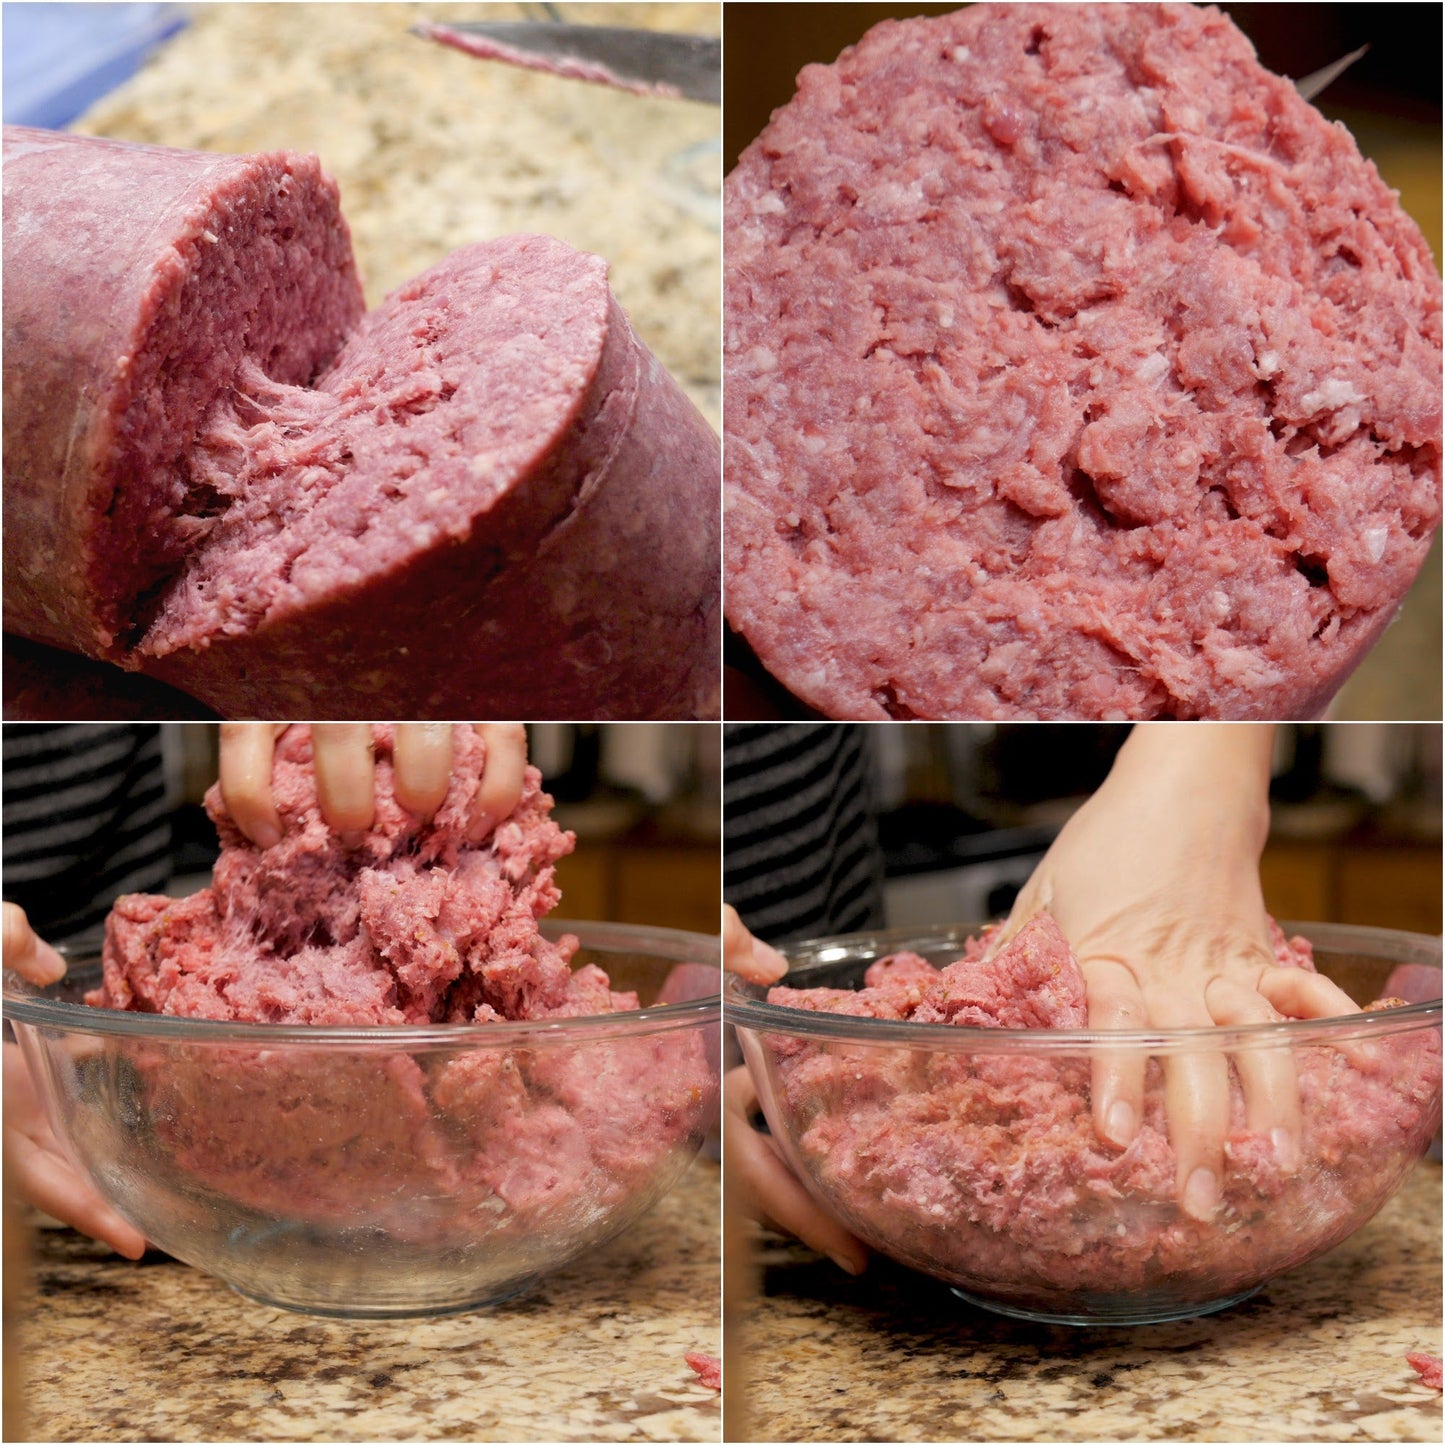 40 lb Case of 80/20 Natural Ground Beef (in 8 - 5lb Chubs) Frozen